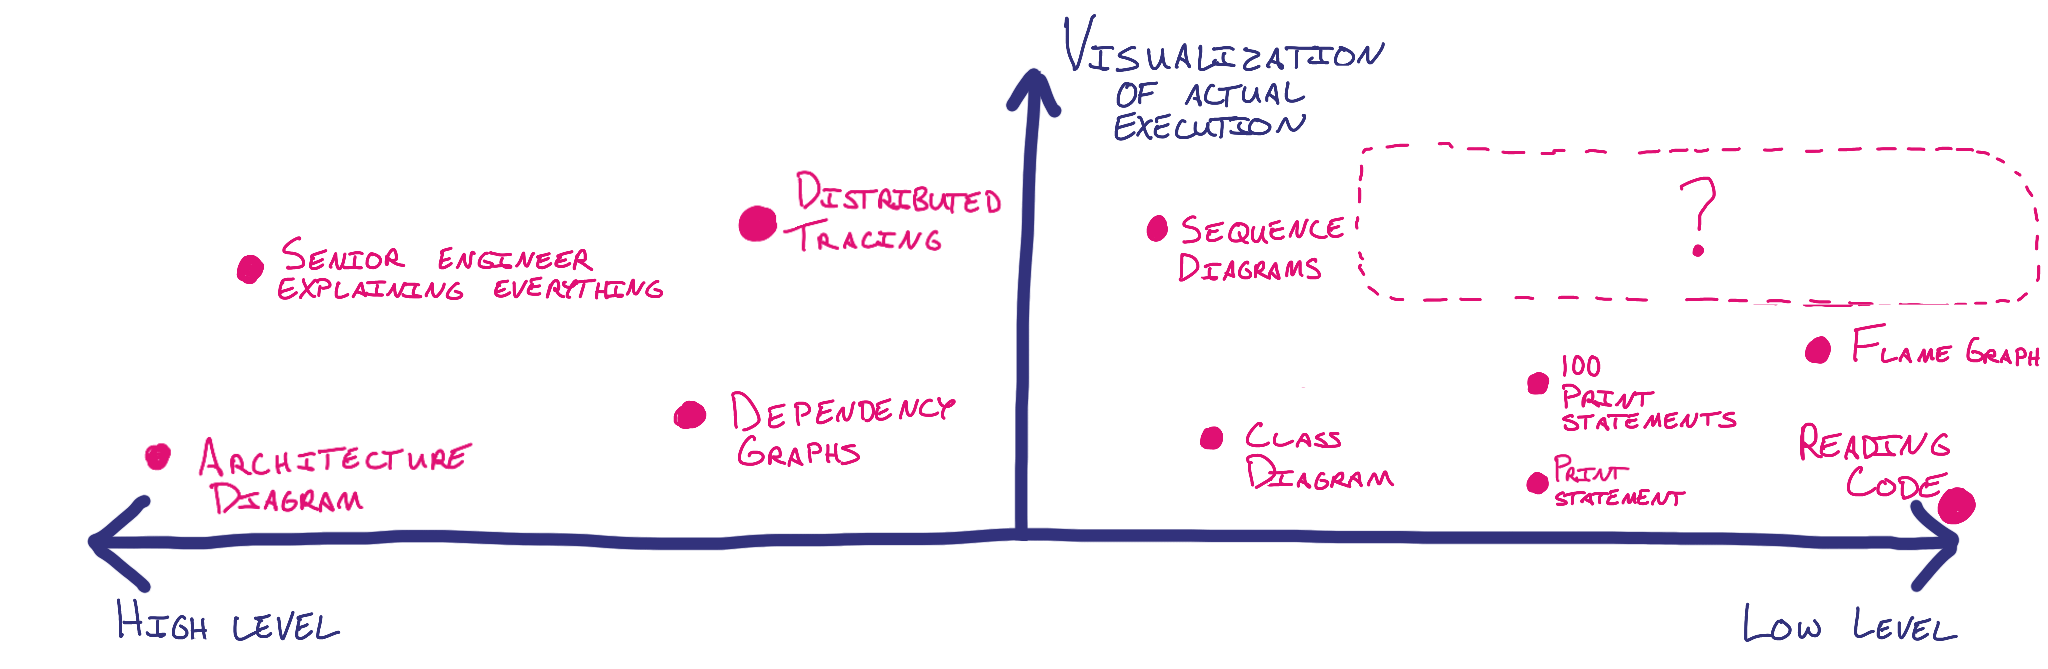 Ranking the above visualizations on a scale from high level to low level along the x axis and &ldquo;visualization of actual execution&rdquo; on the y axis